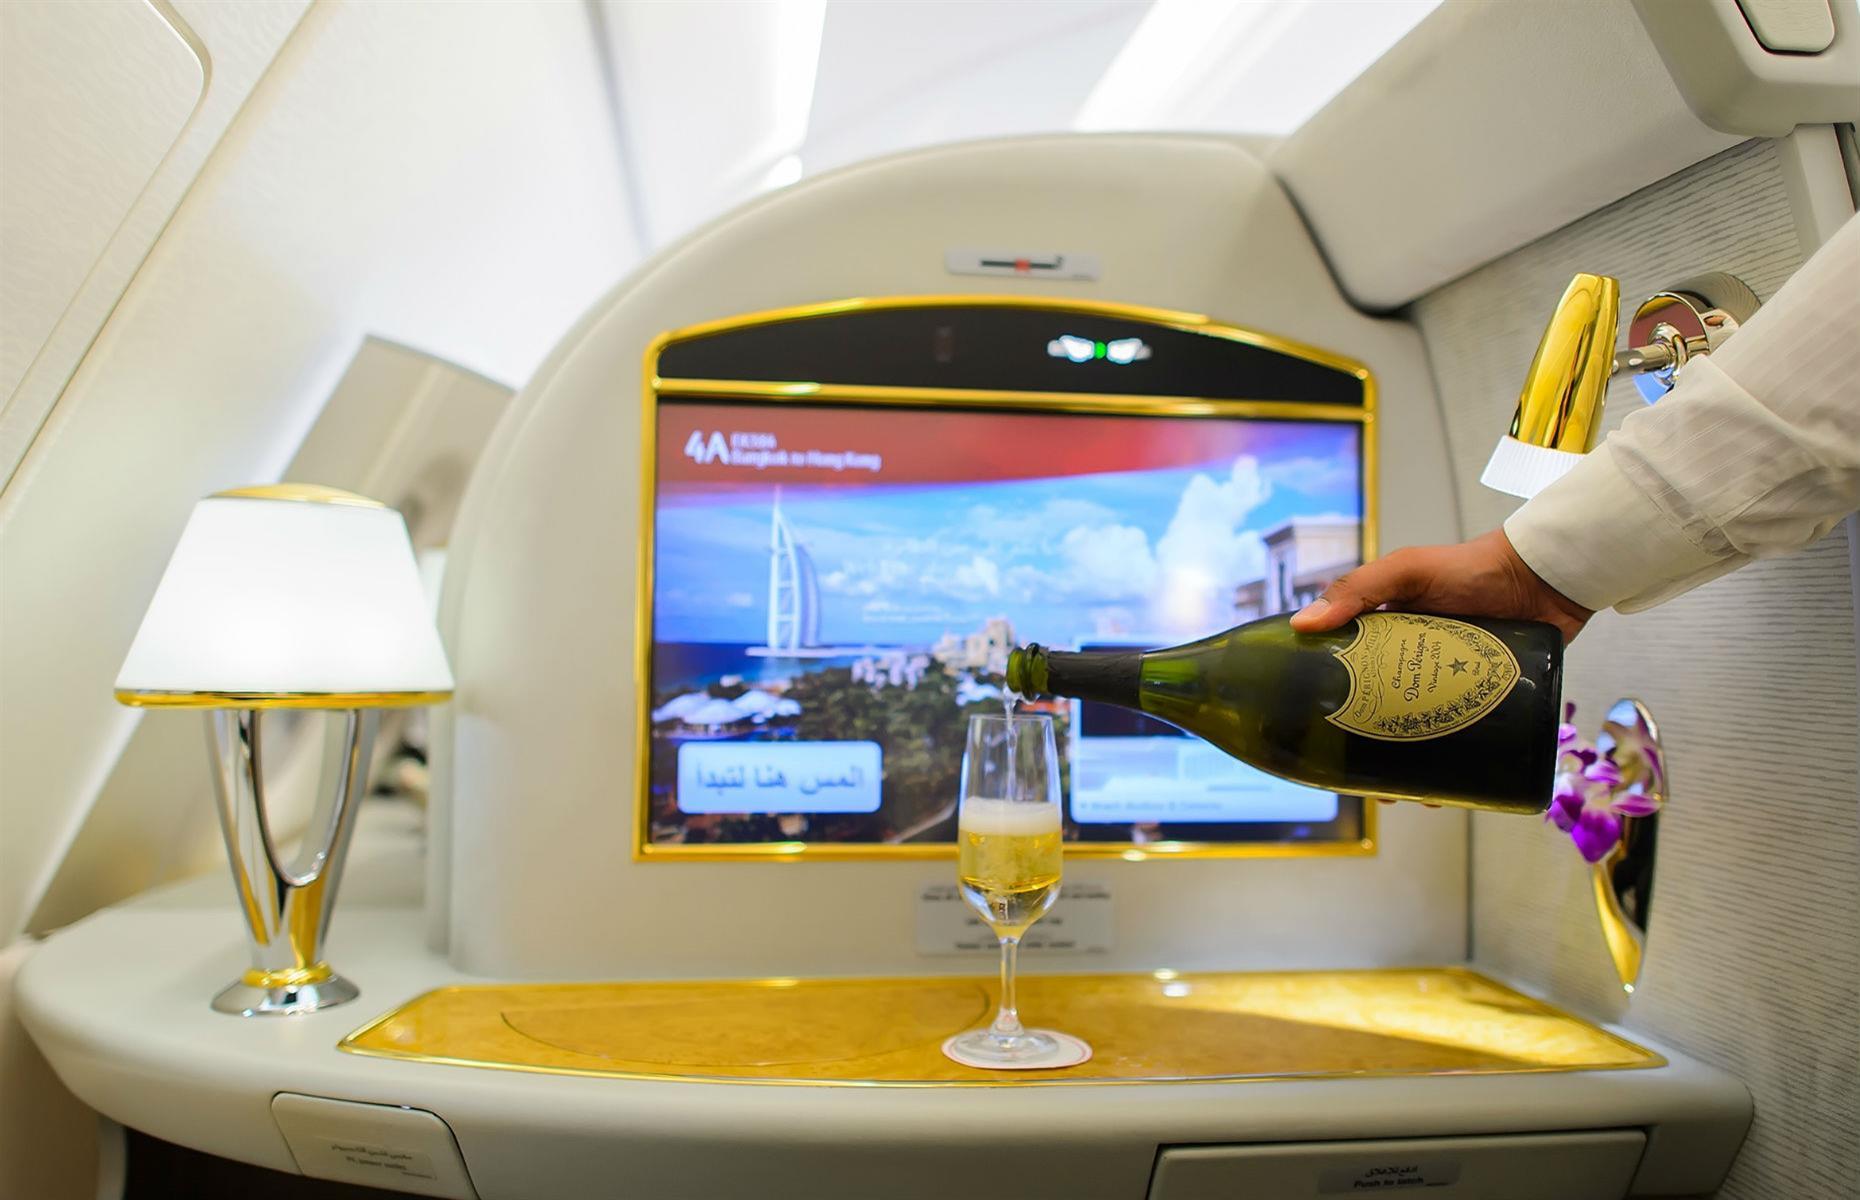 <p>This includes taking anything from the galley without permission. It also includes decanting the sparkling wine from premium economy galleys into a separate bottle, which is frankly just crass.</p>